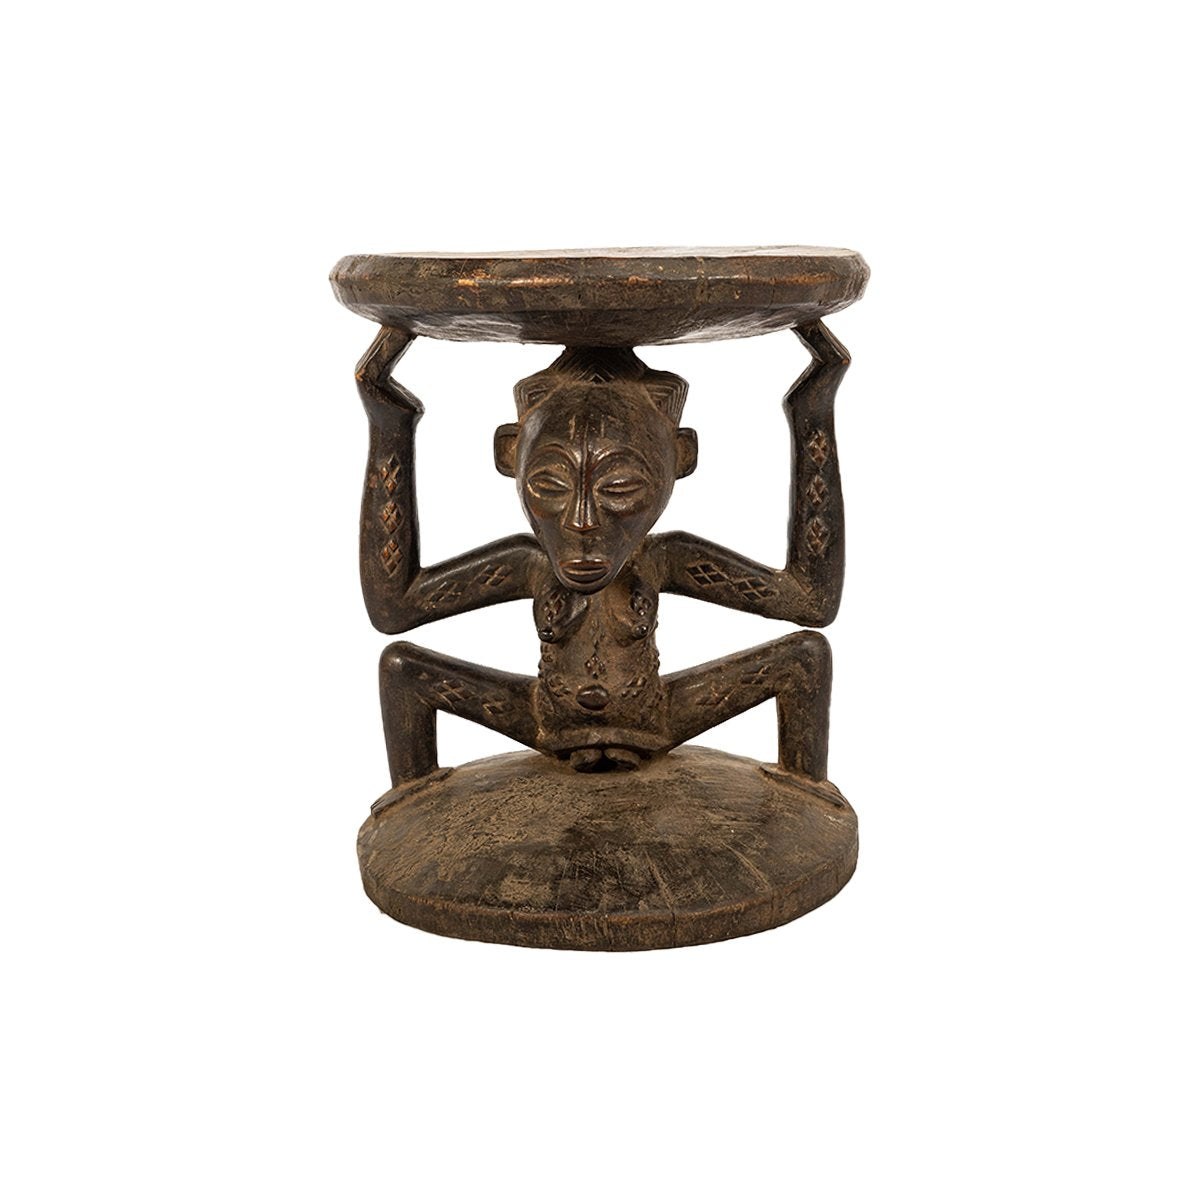 Zula stool - Authentic African handicrafts | Clothing, bags, painting, toys & more - CULTURE HUB by Muthoni Unchained